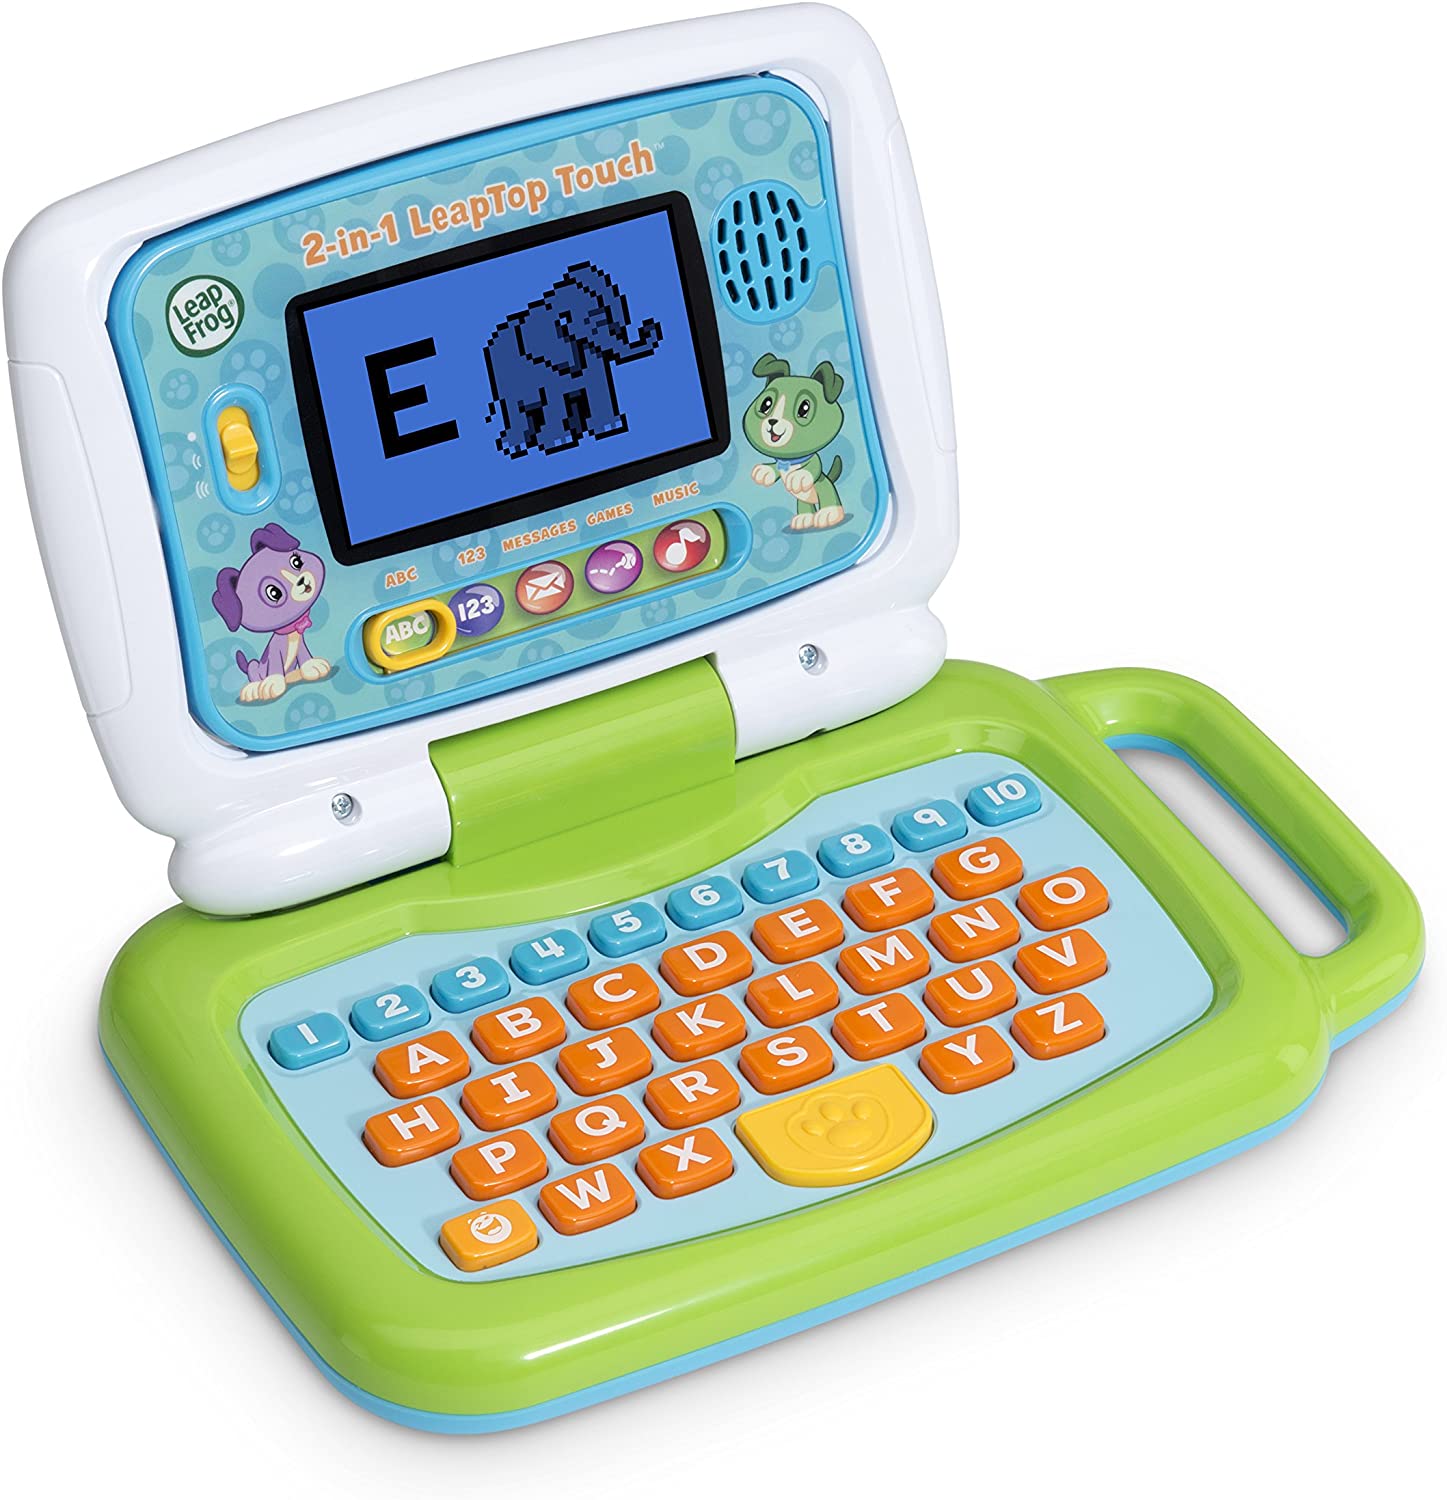 LeapFrog 2-in-1 LeapTop Touch, Green - Laptop Pretend Laptops For Toddlers